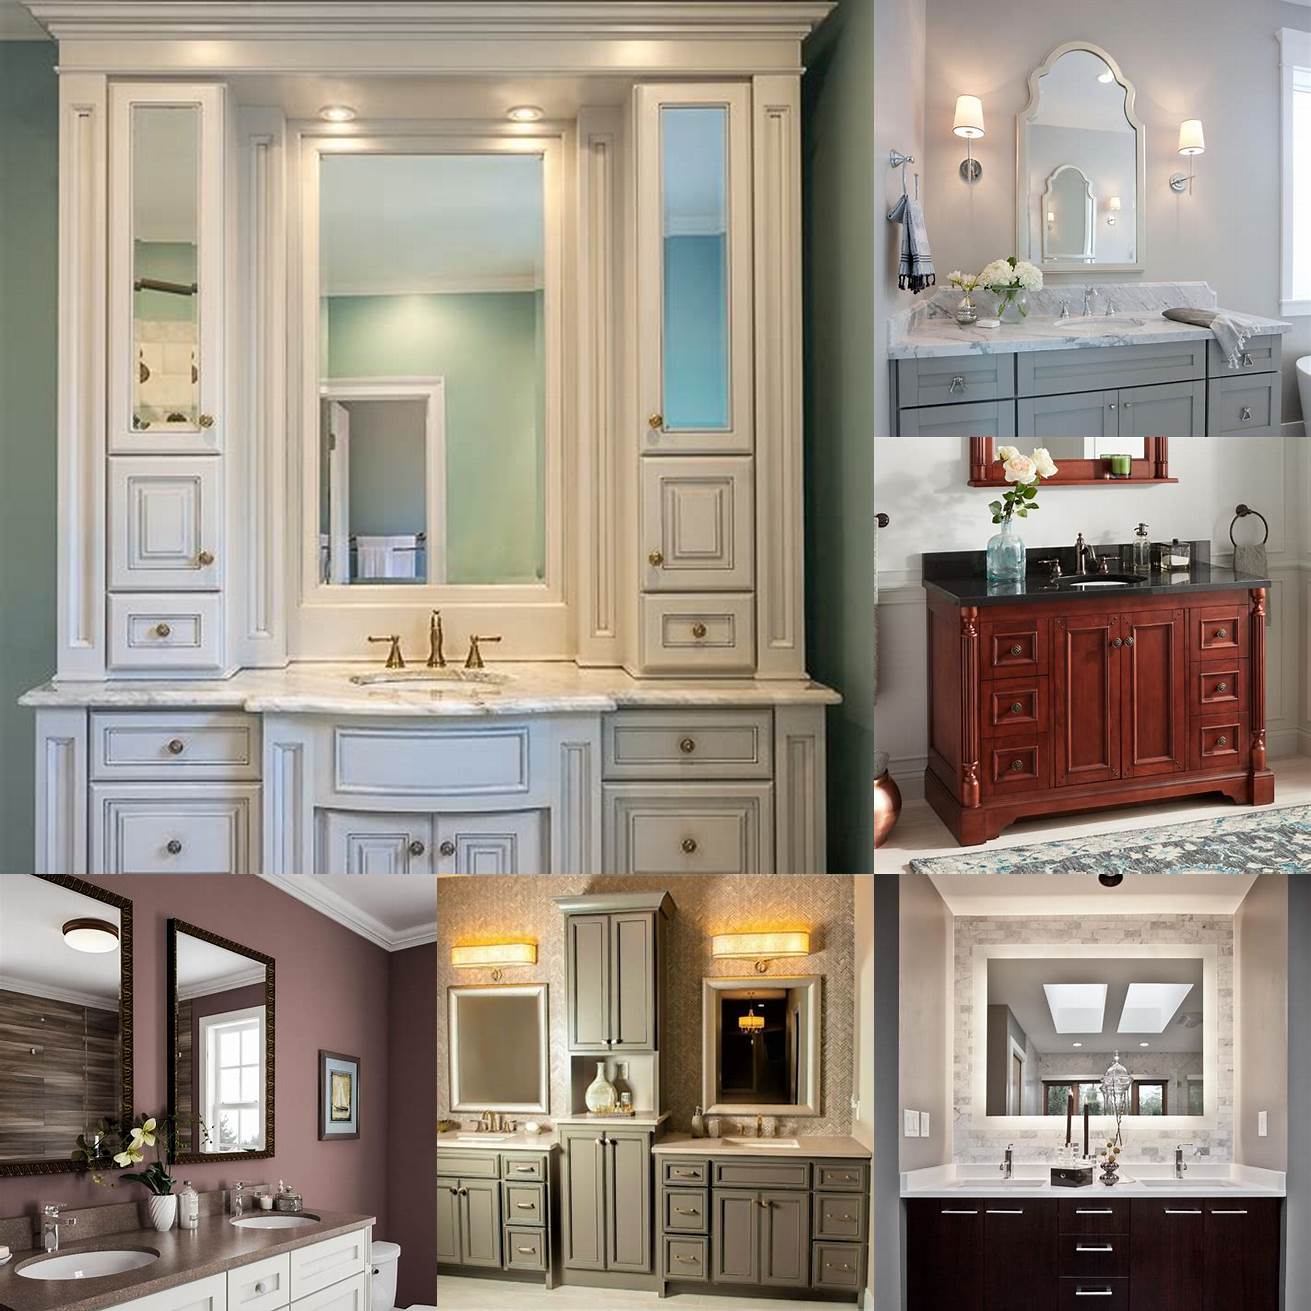 The vanity is available in various finishes to match your bathroom decor